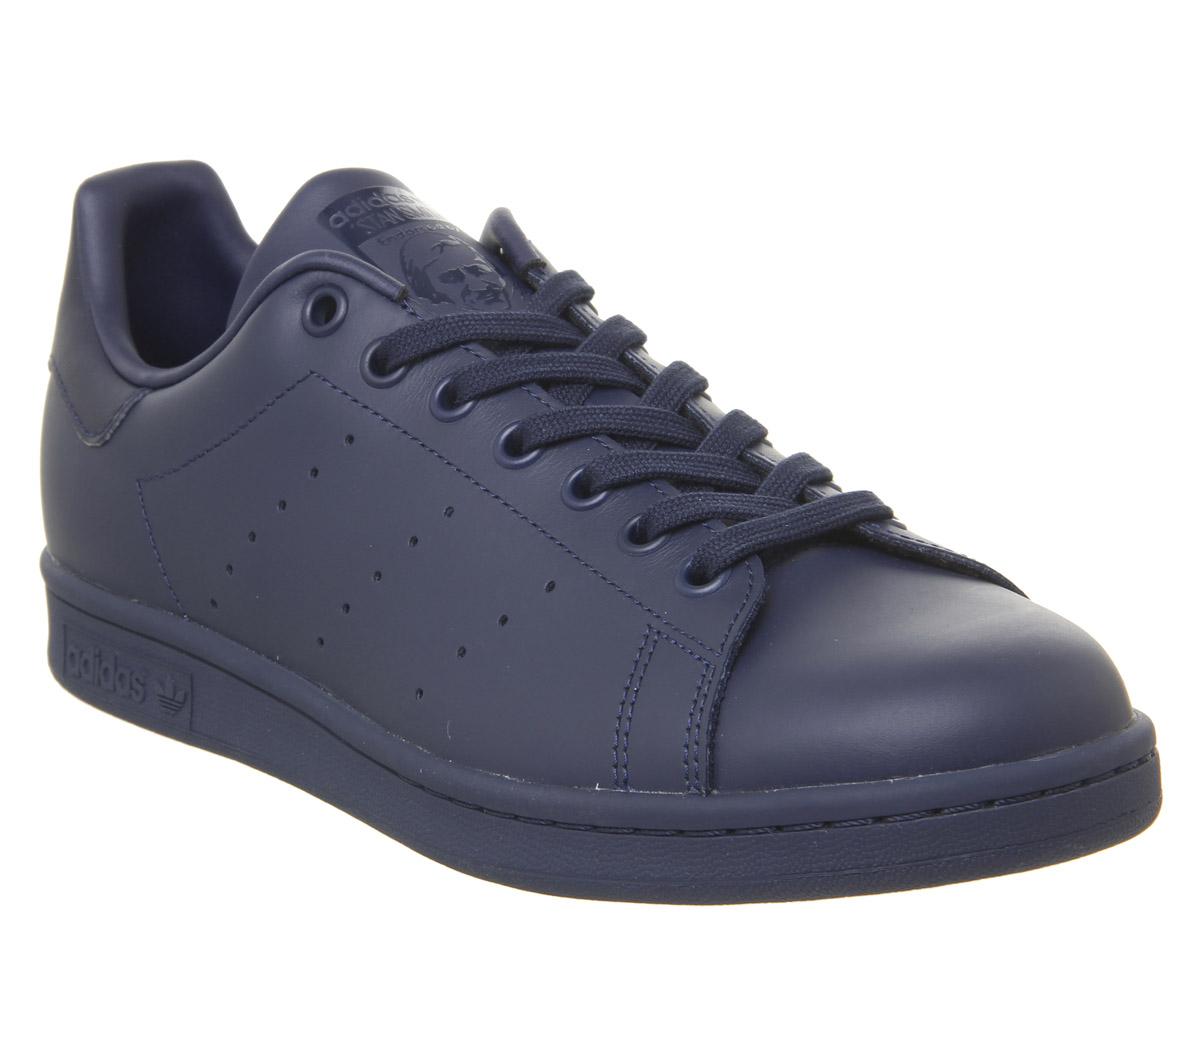 Adidas Stan Smith Navy Online Sale, UP TO 60% OFF